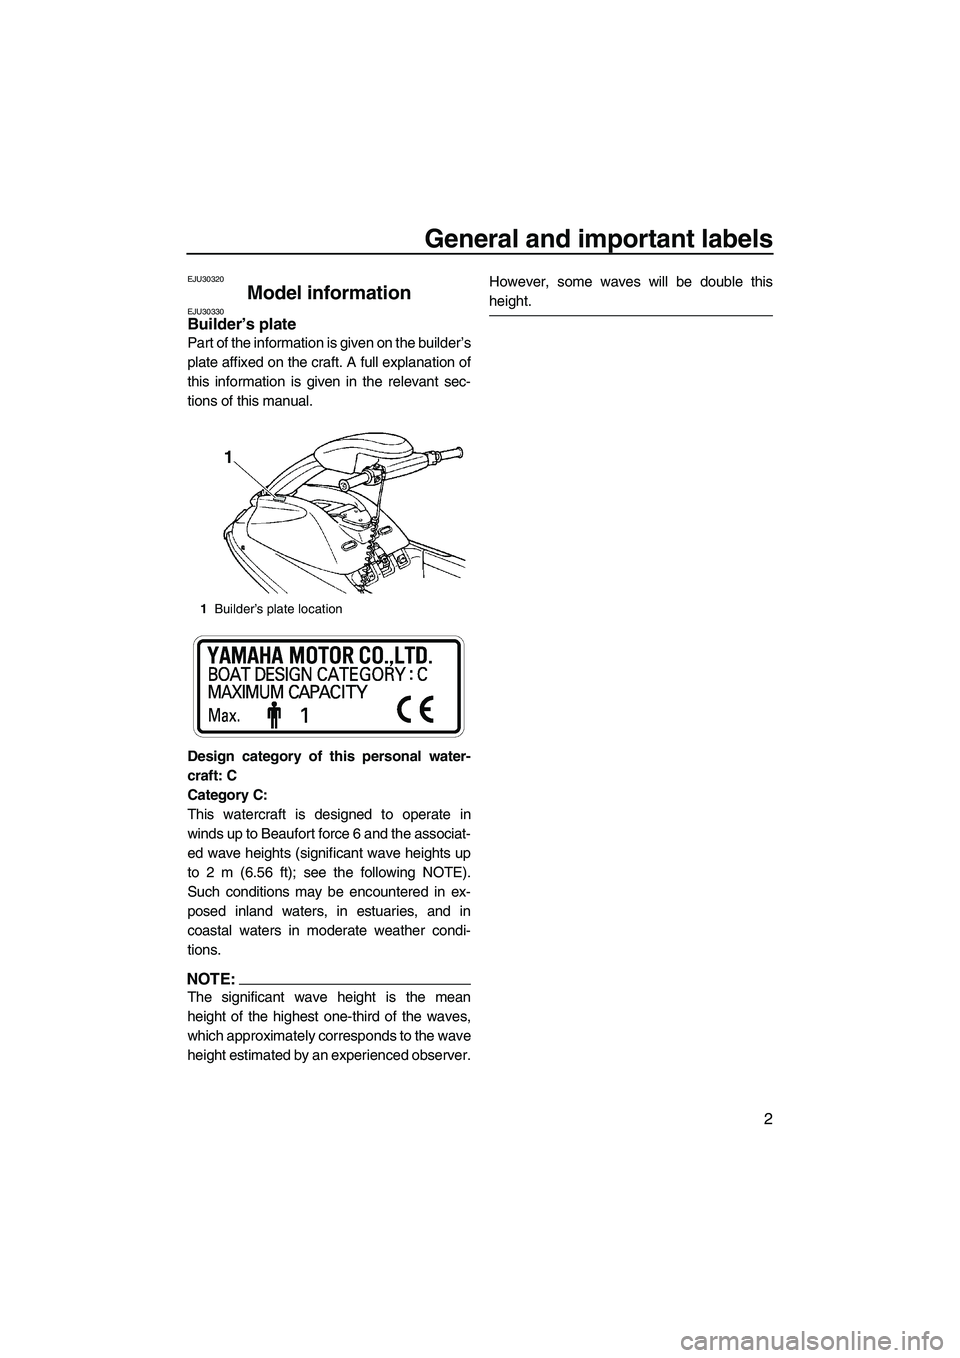 YAMAHA SUPERJET 2007  Owners Manual General and important labels
2
EJU30320
Model information EJU30330Builder’s plate 
Part of the information is given on the builder’s
plate affixed on the craft. A full explanation of
this informat